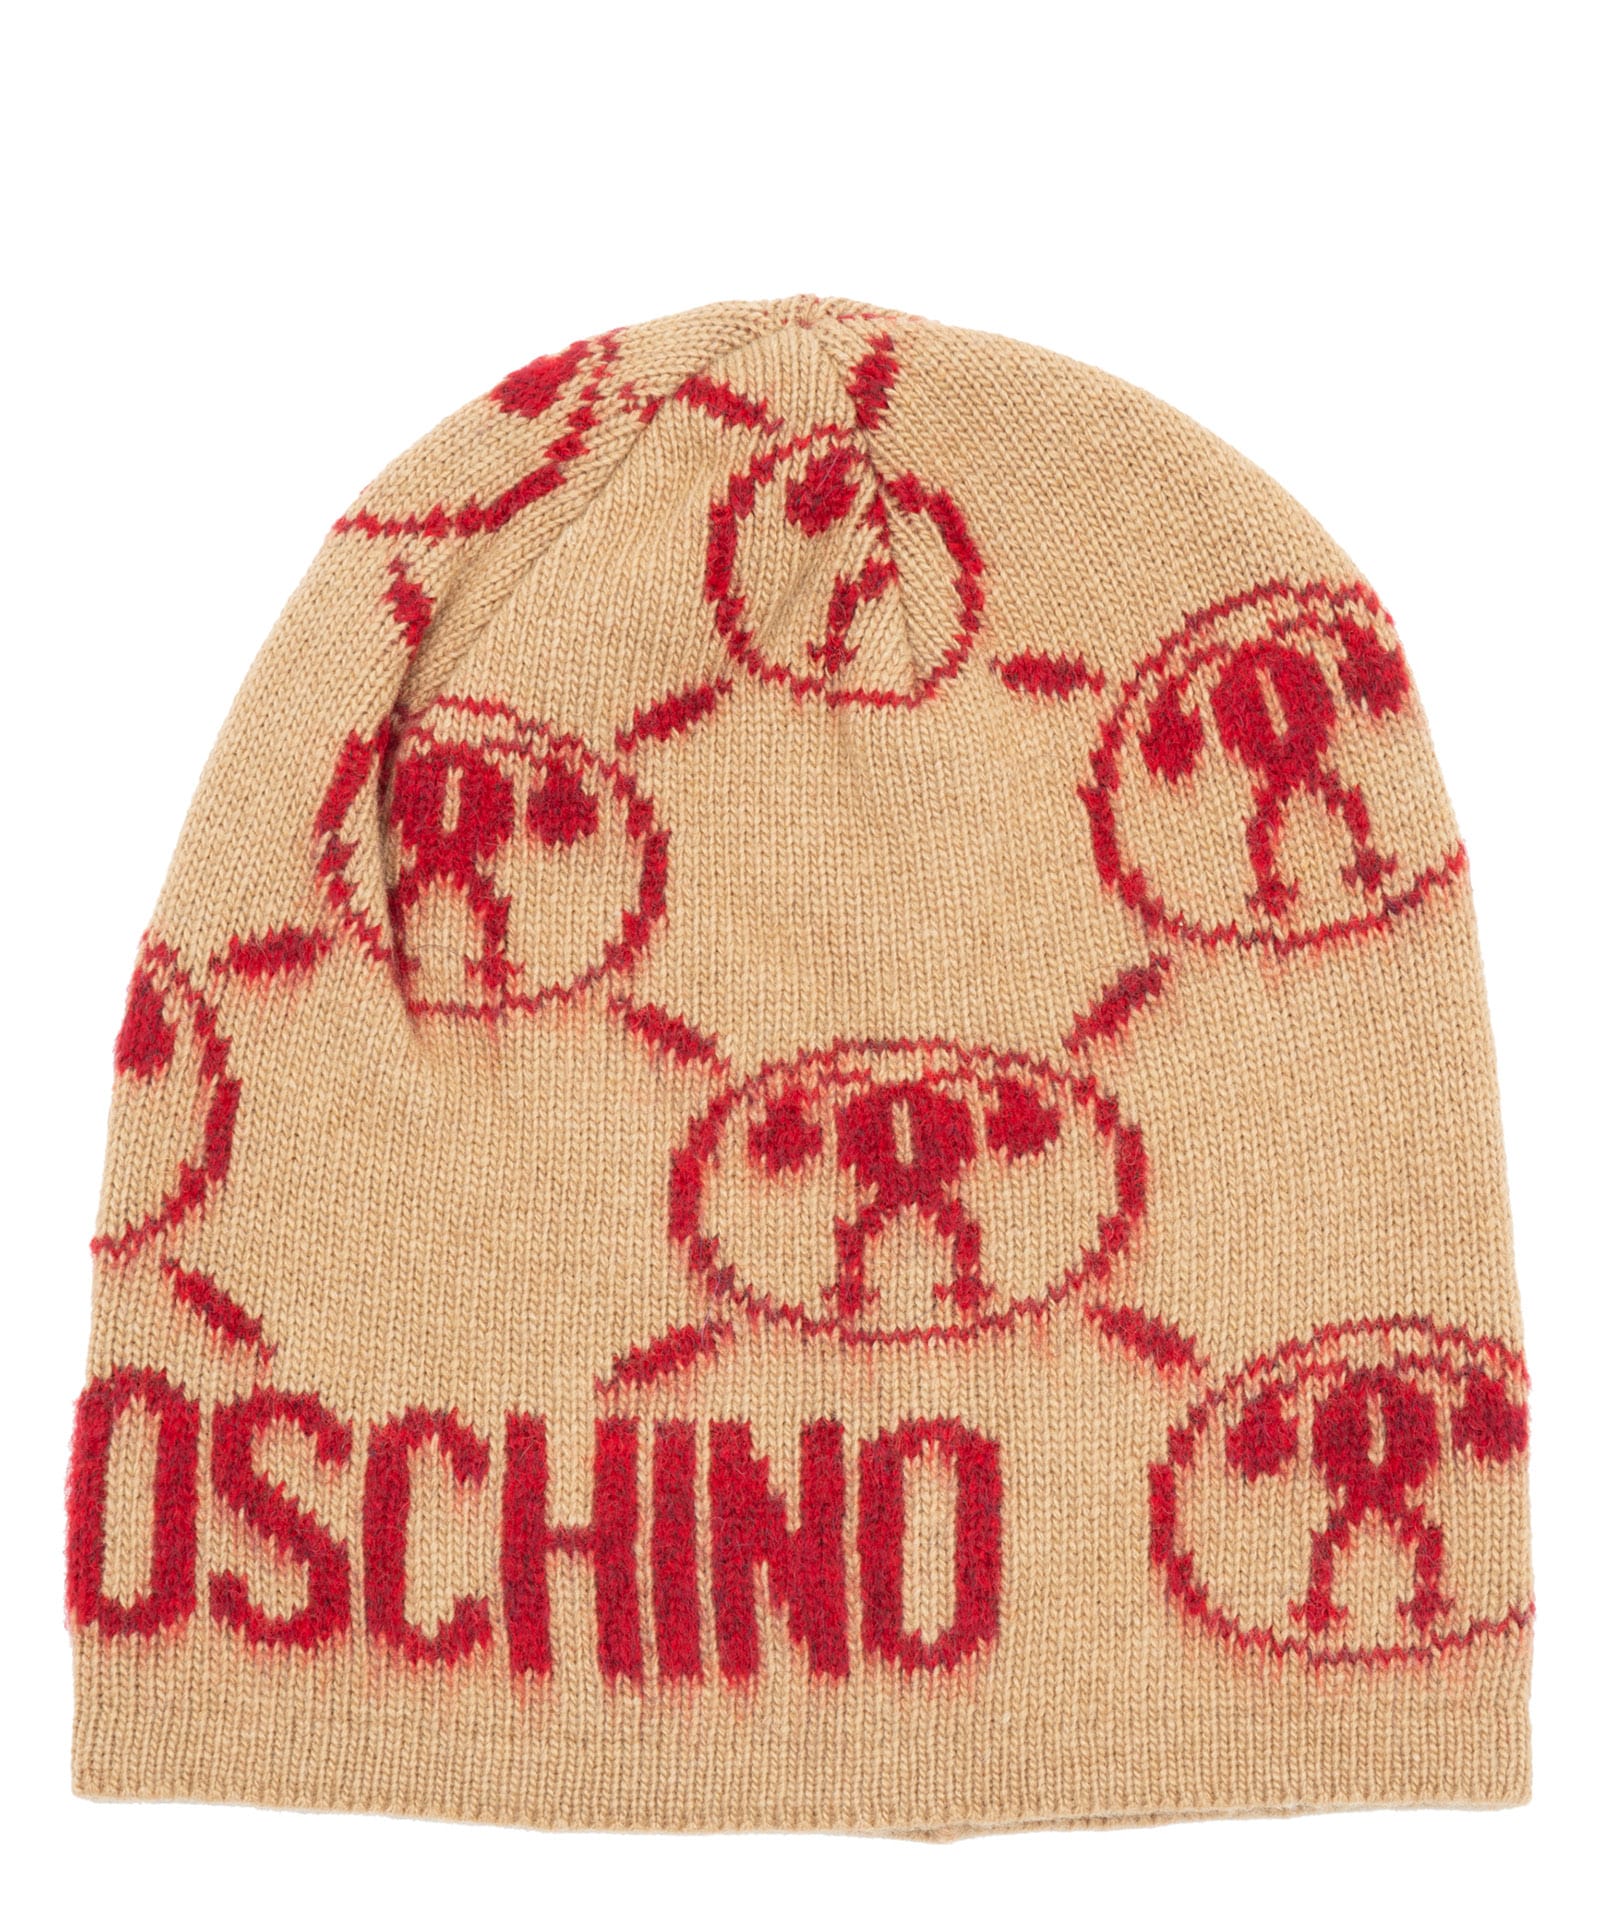 MOSCHINO DOUBLE QUESTION MARK CASHMERE BEANIE